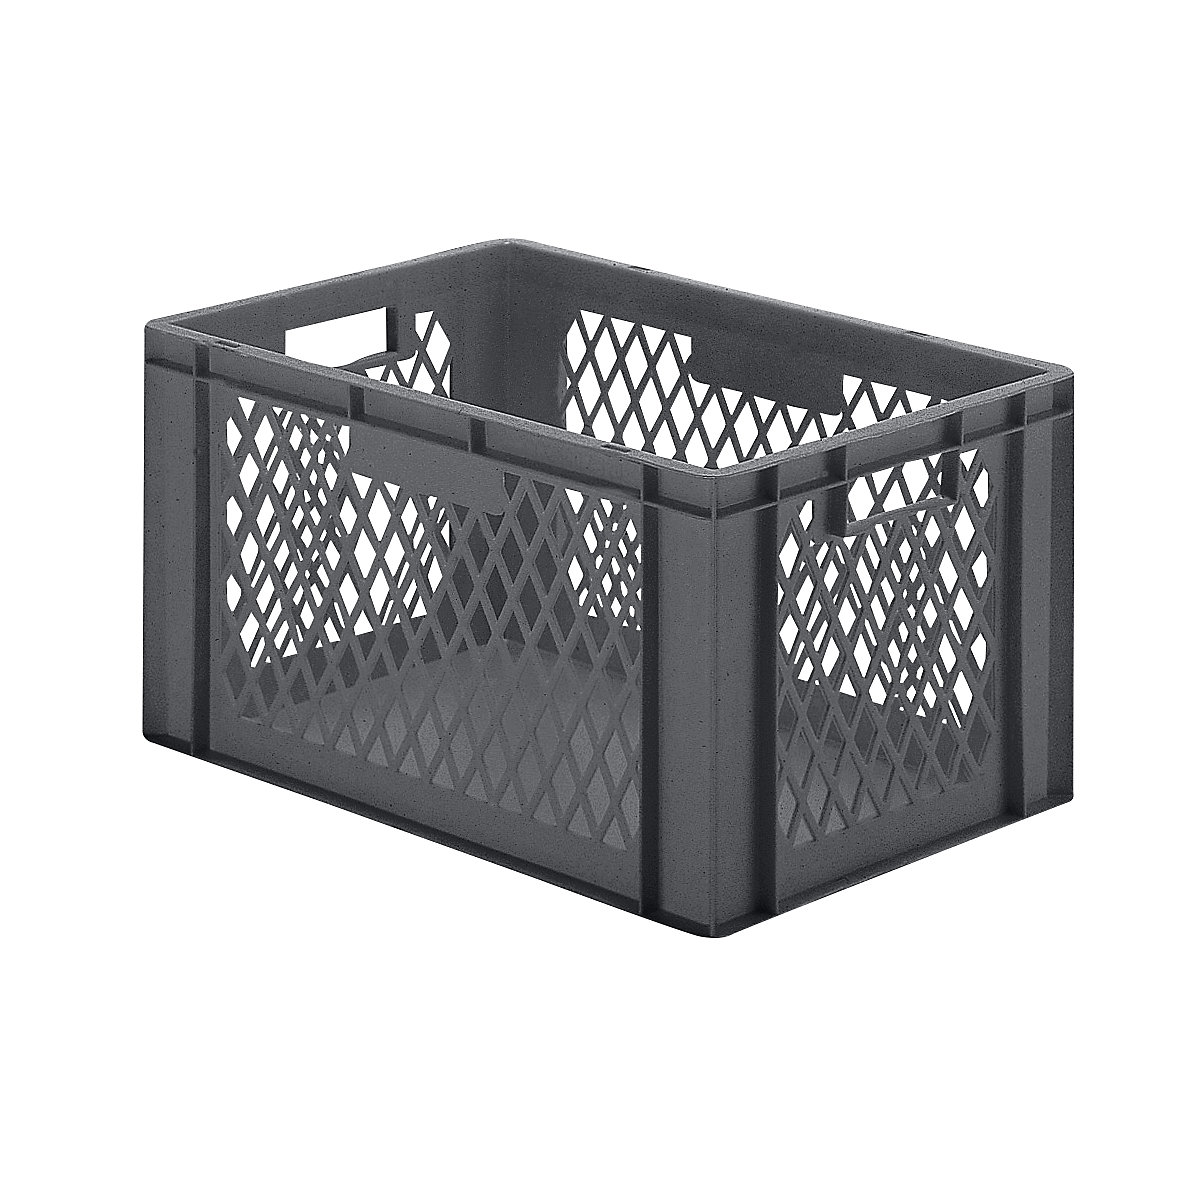 Euro stacking container, perforated walls, closed base, LxWxH 600 x 400 x 320 mm, grey, pack of 5